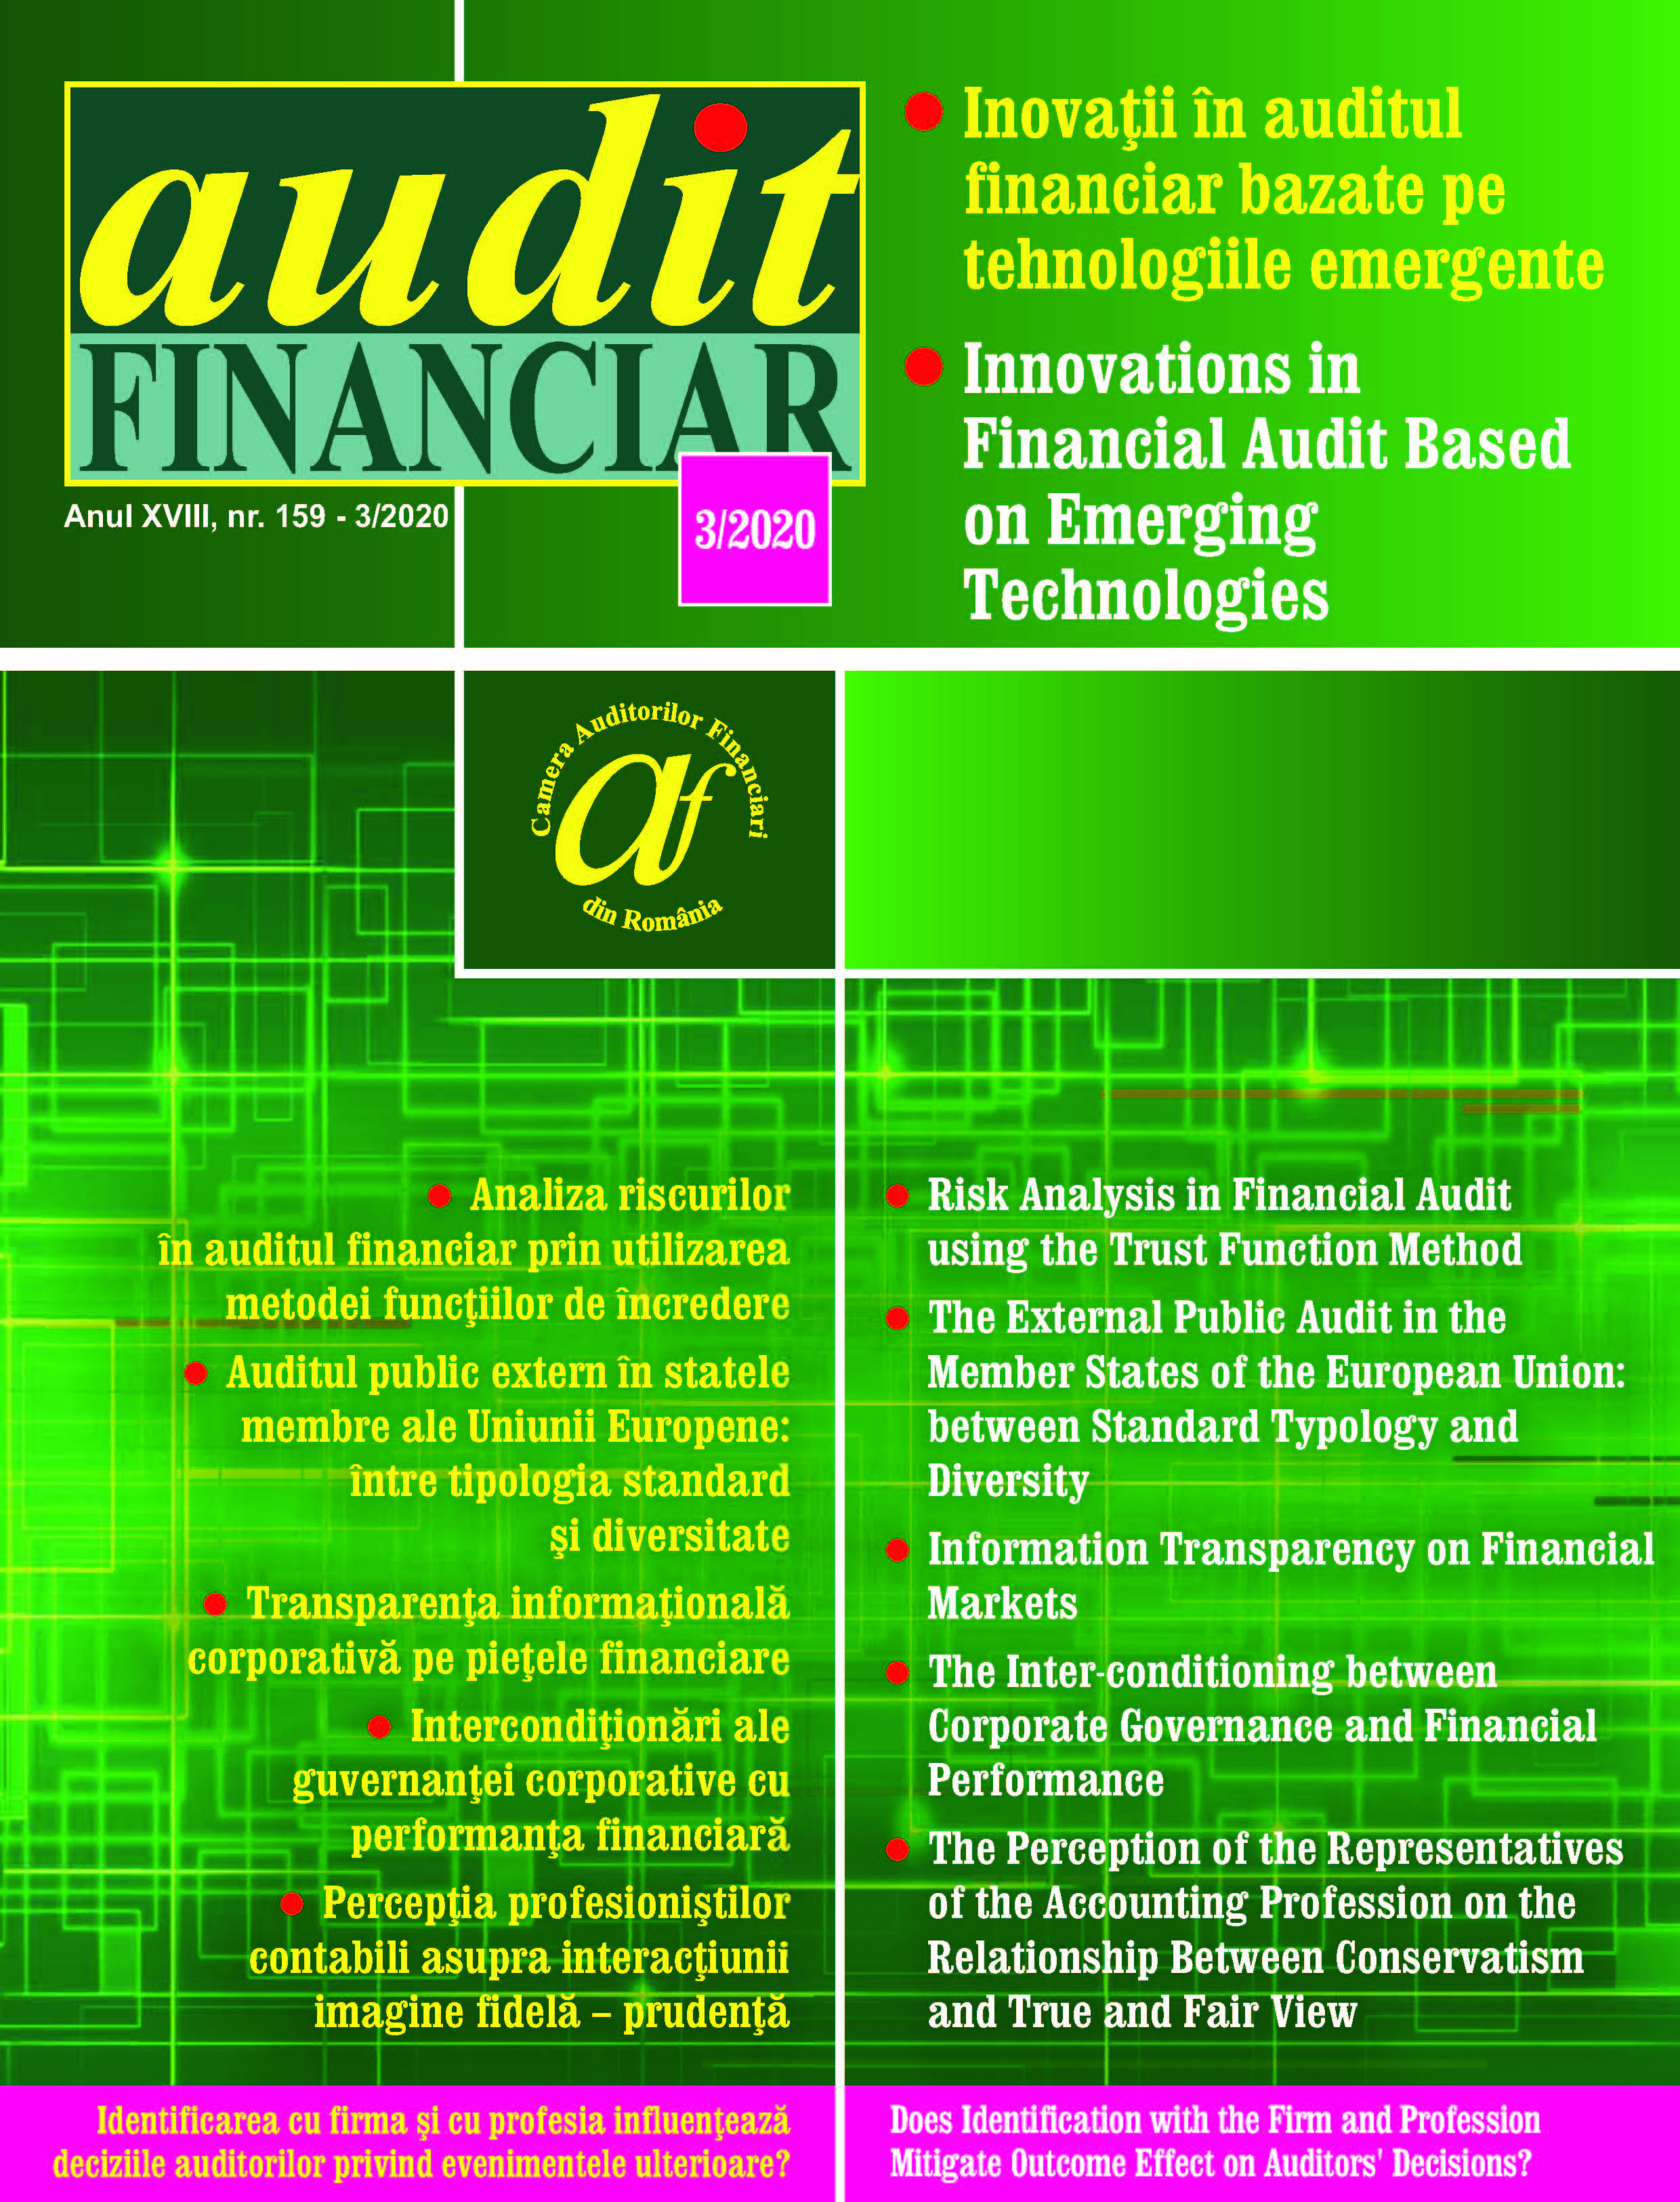 Information Transparency on Financial Markets, an International View Cover Image